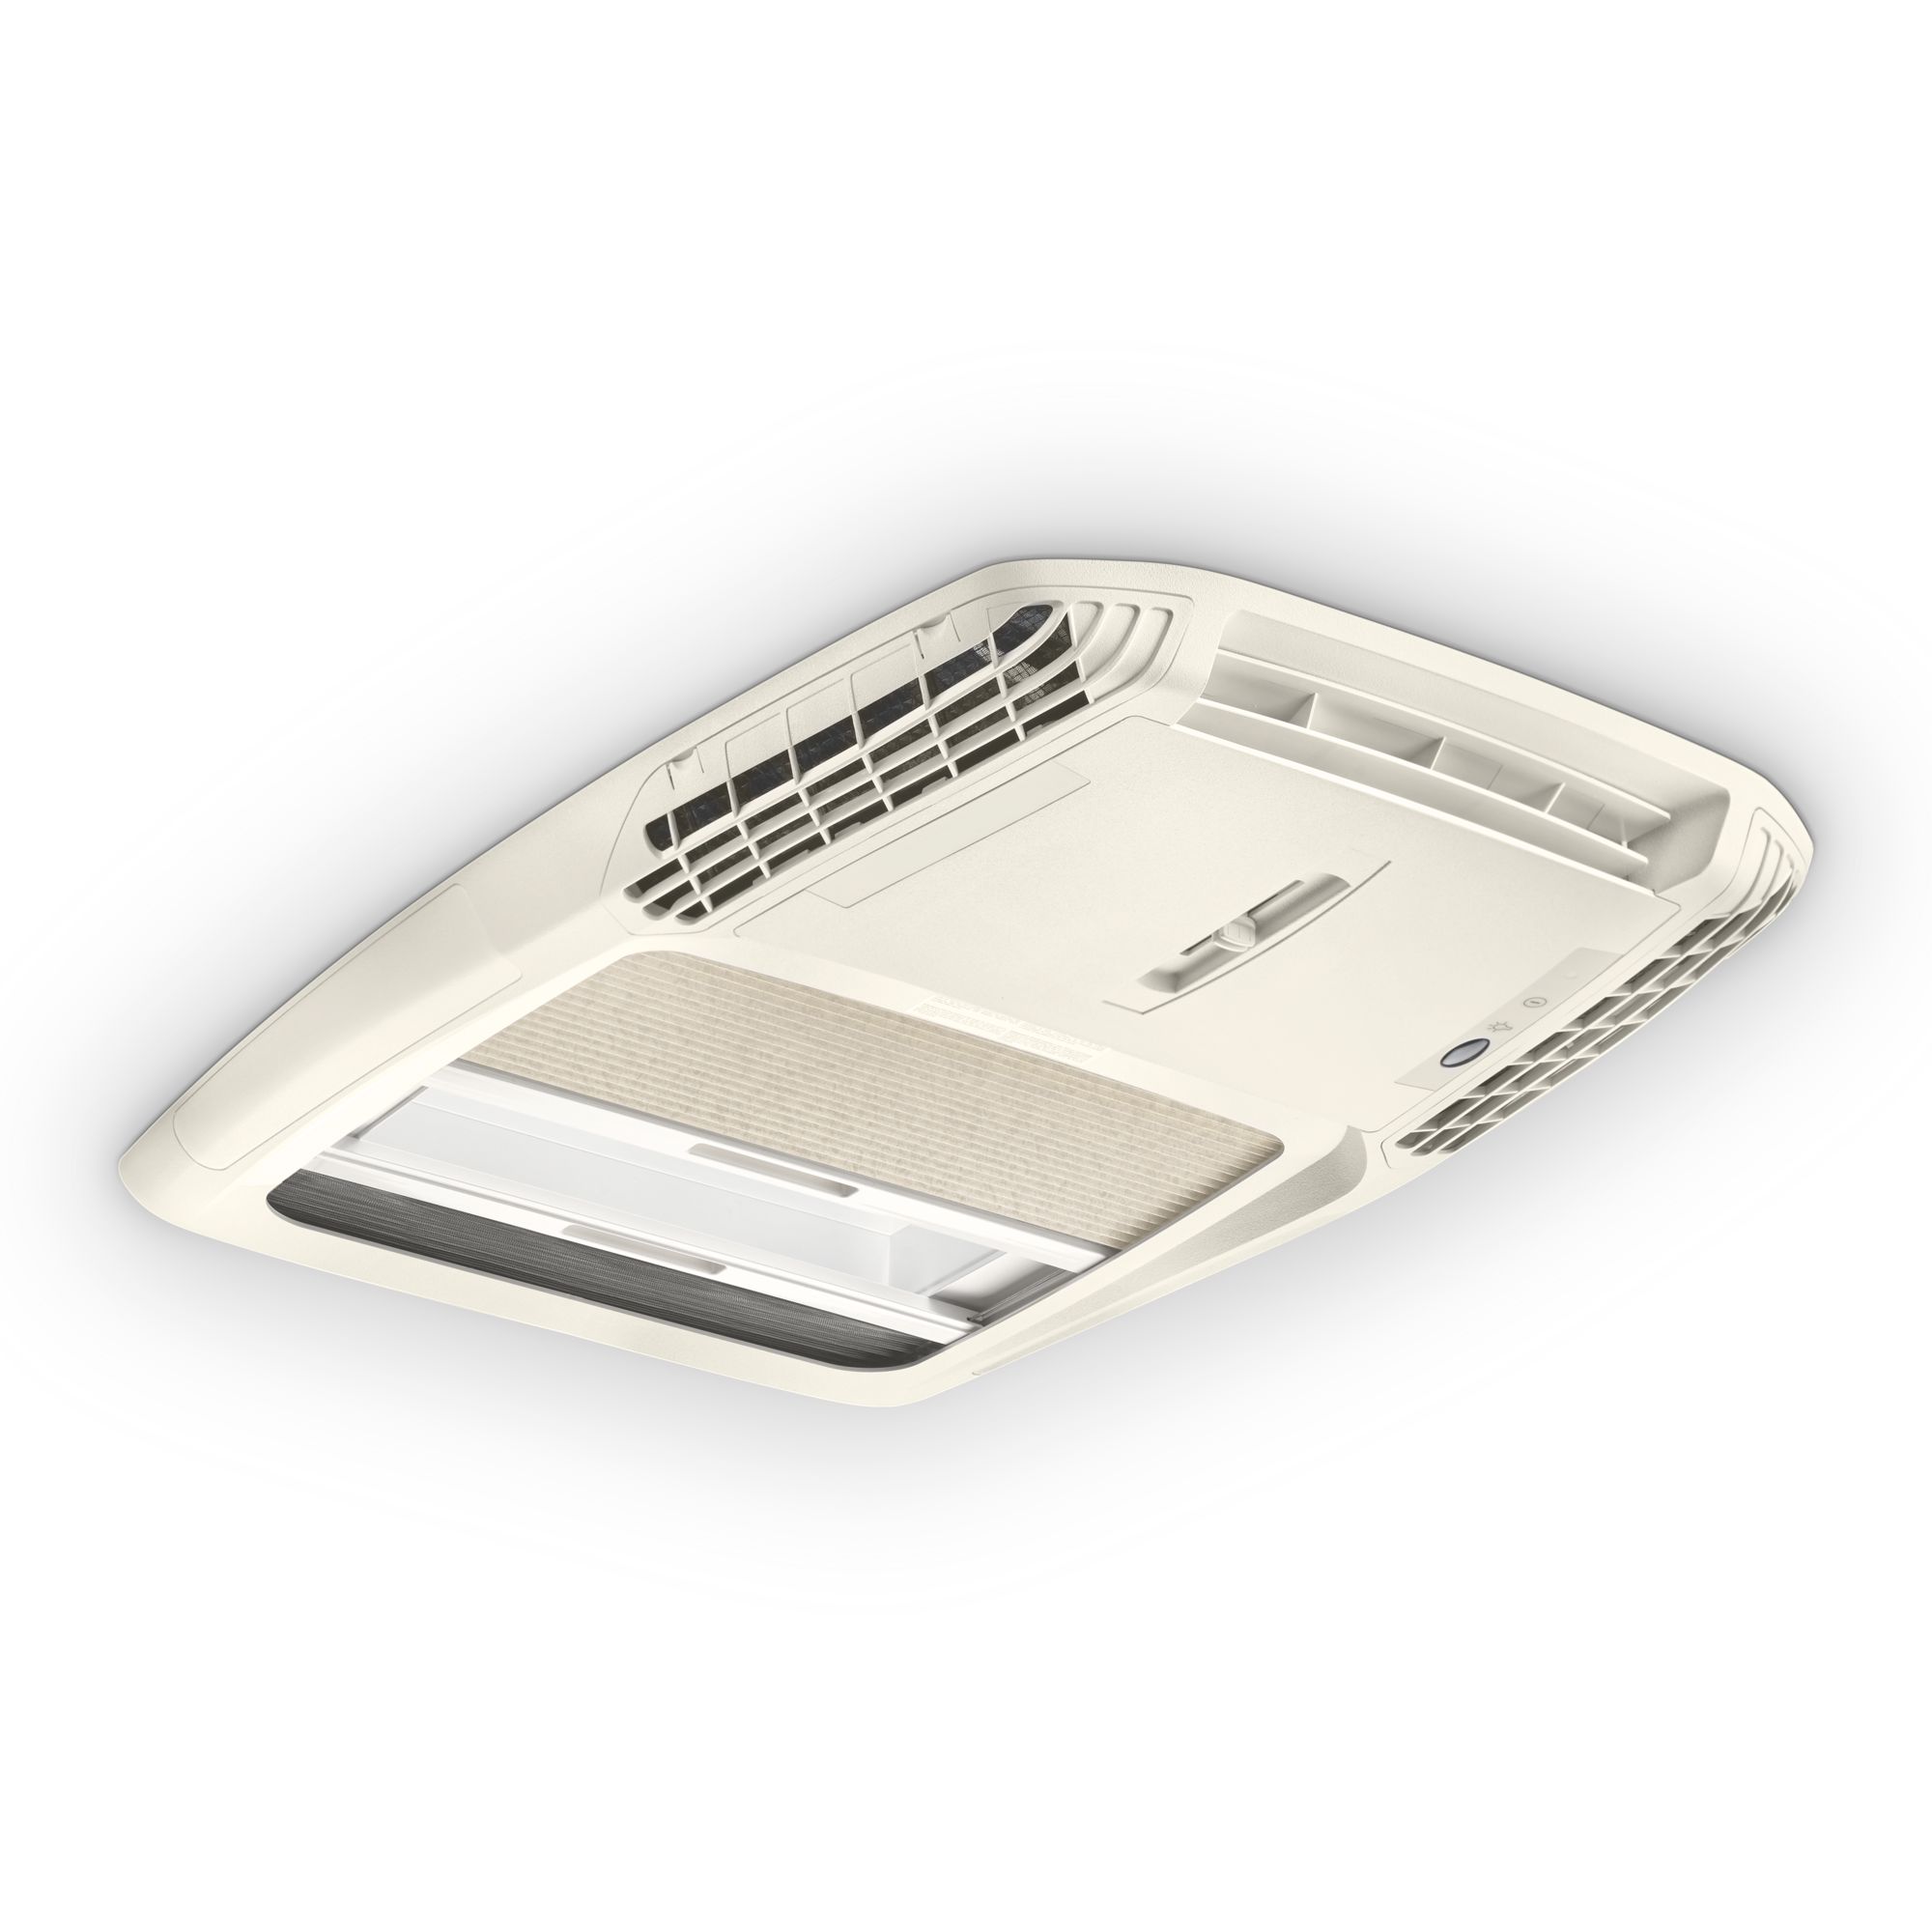 Dometic FreshLight 2200 Air Conditioner with integrated roof light for vehicles up to 7 meters length